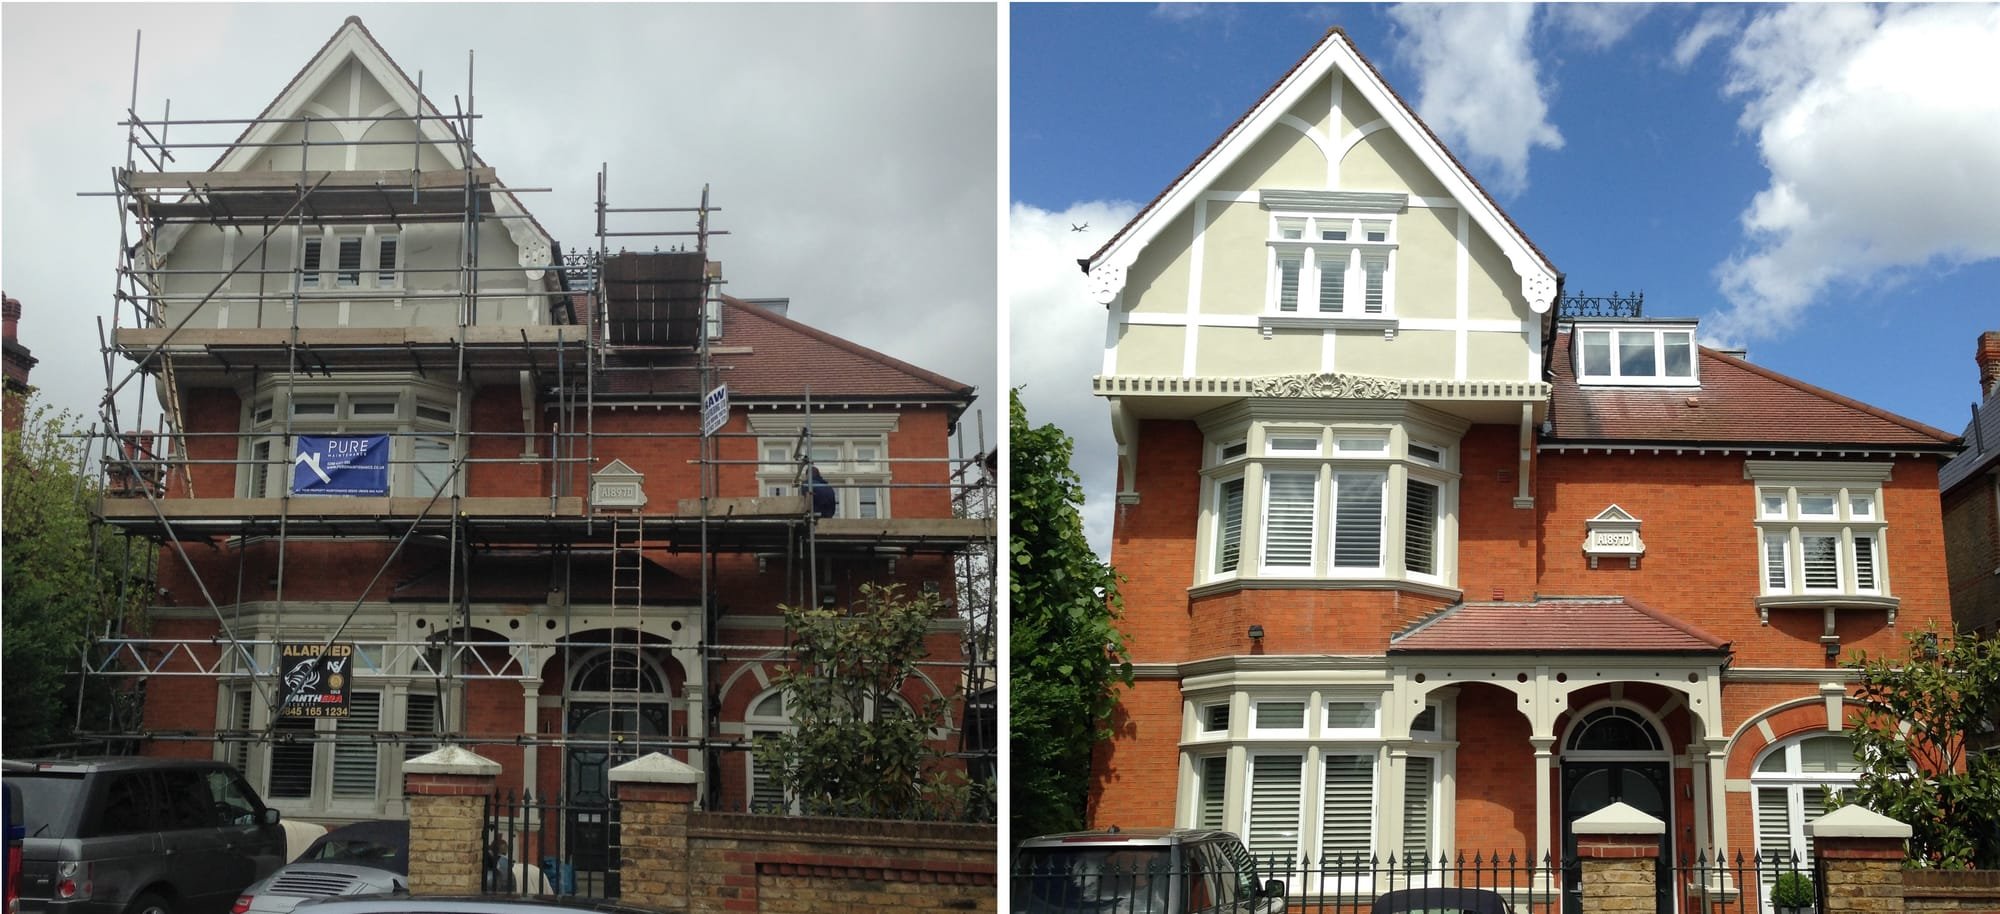 Full external decoration of this detached house in Wandsworth.